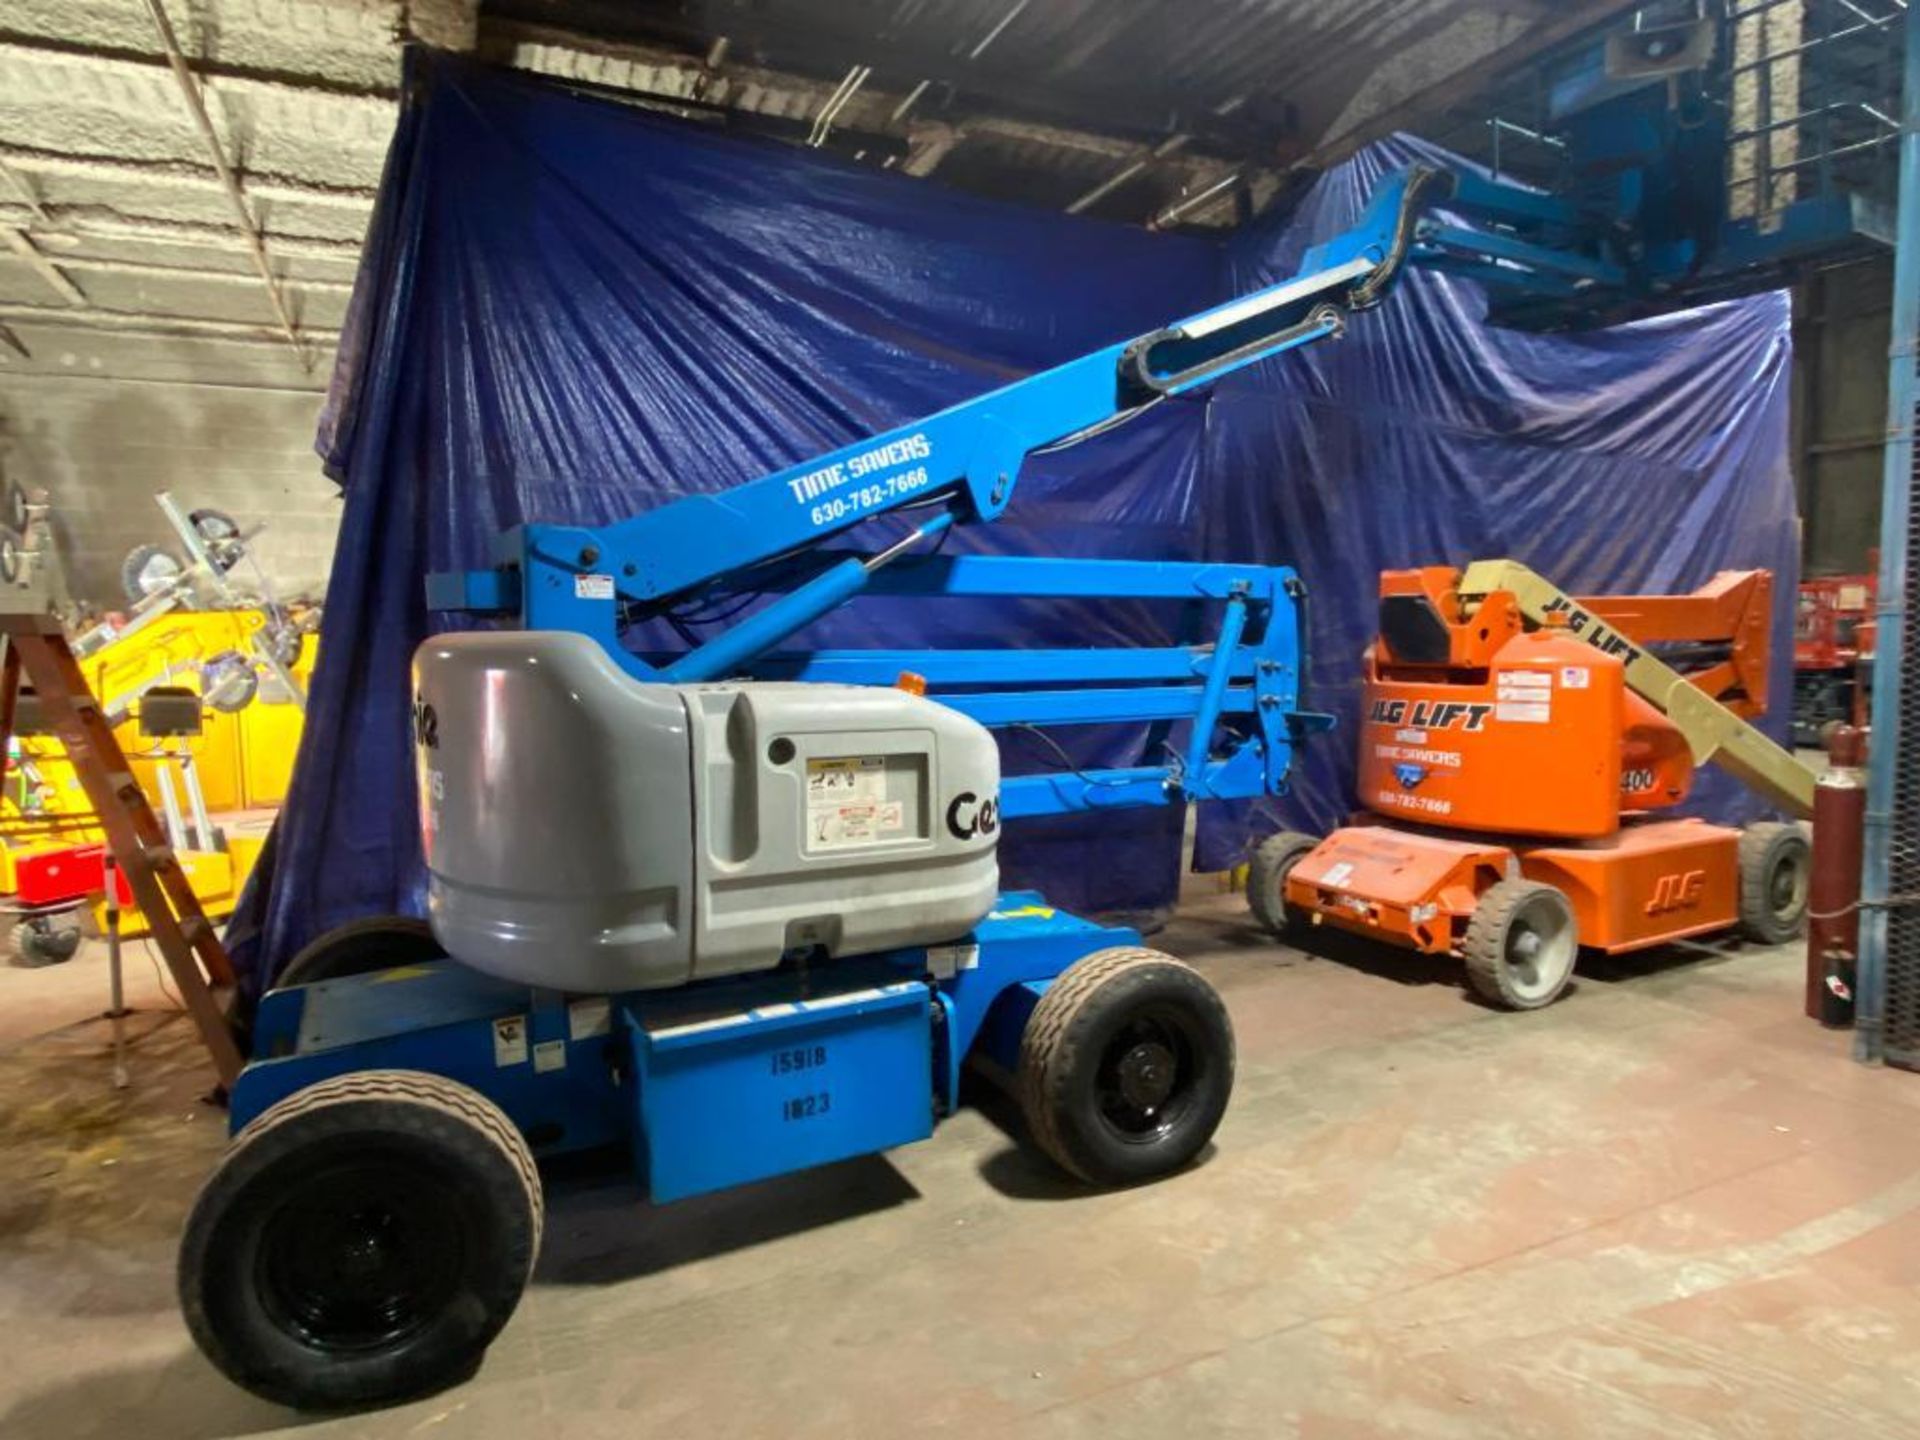 Genie Z45/25J Articulating Boom Lift (S/N 15918, Year 2000), with 45' Platform Height, 25'